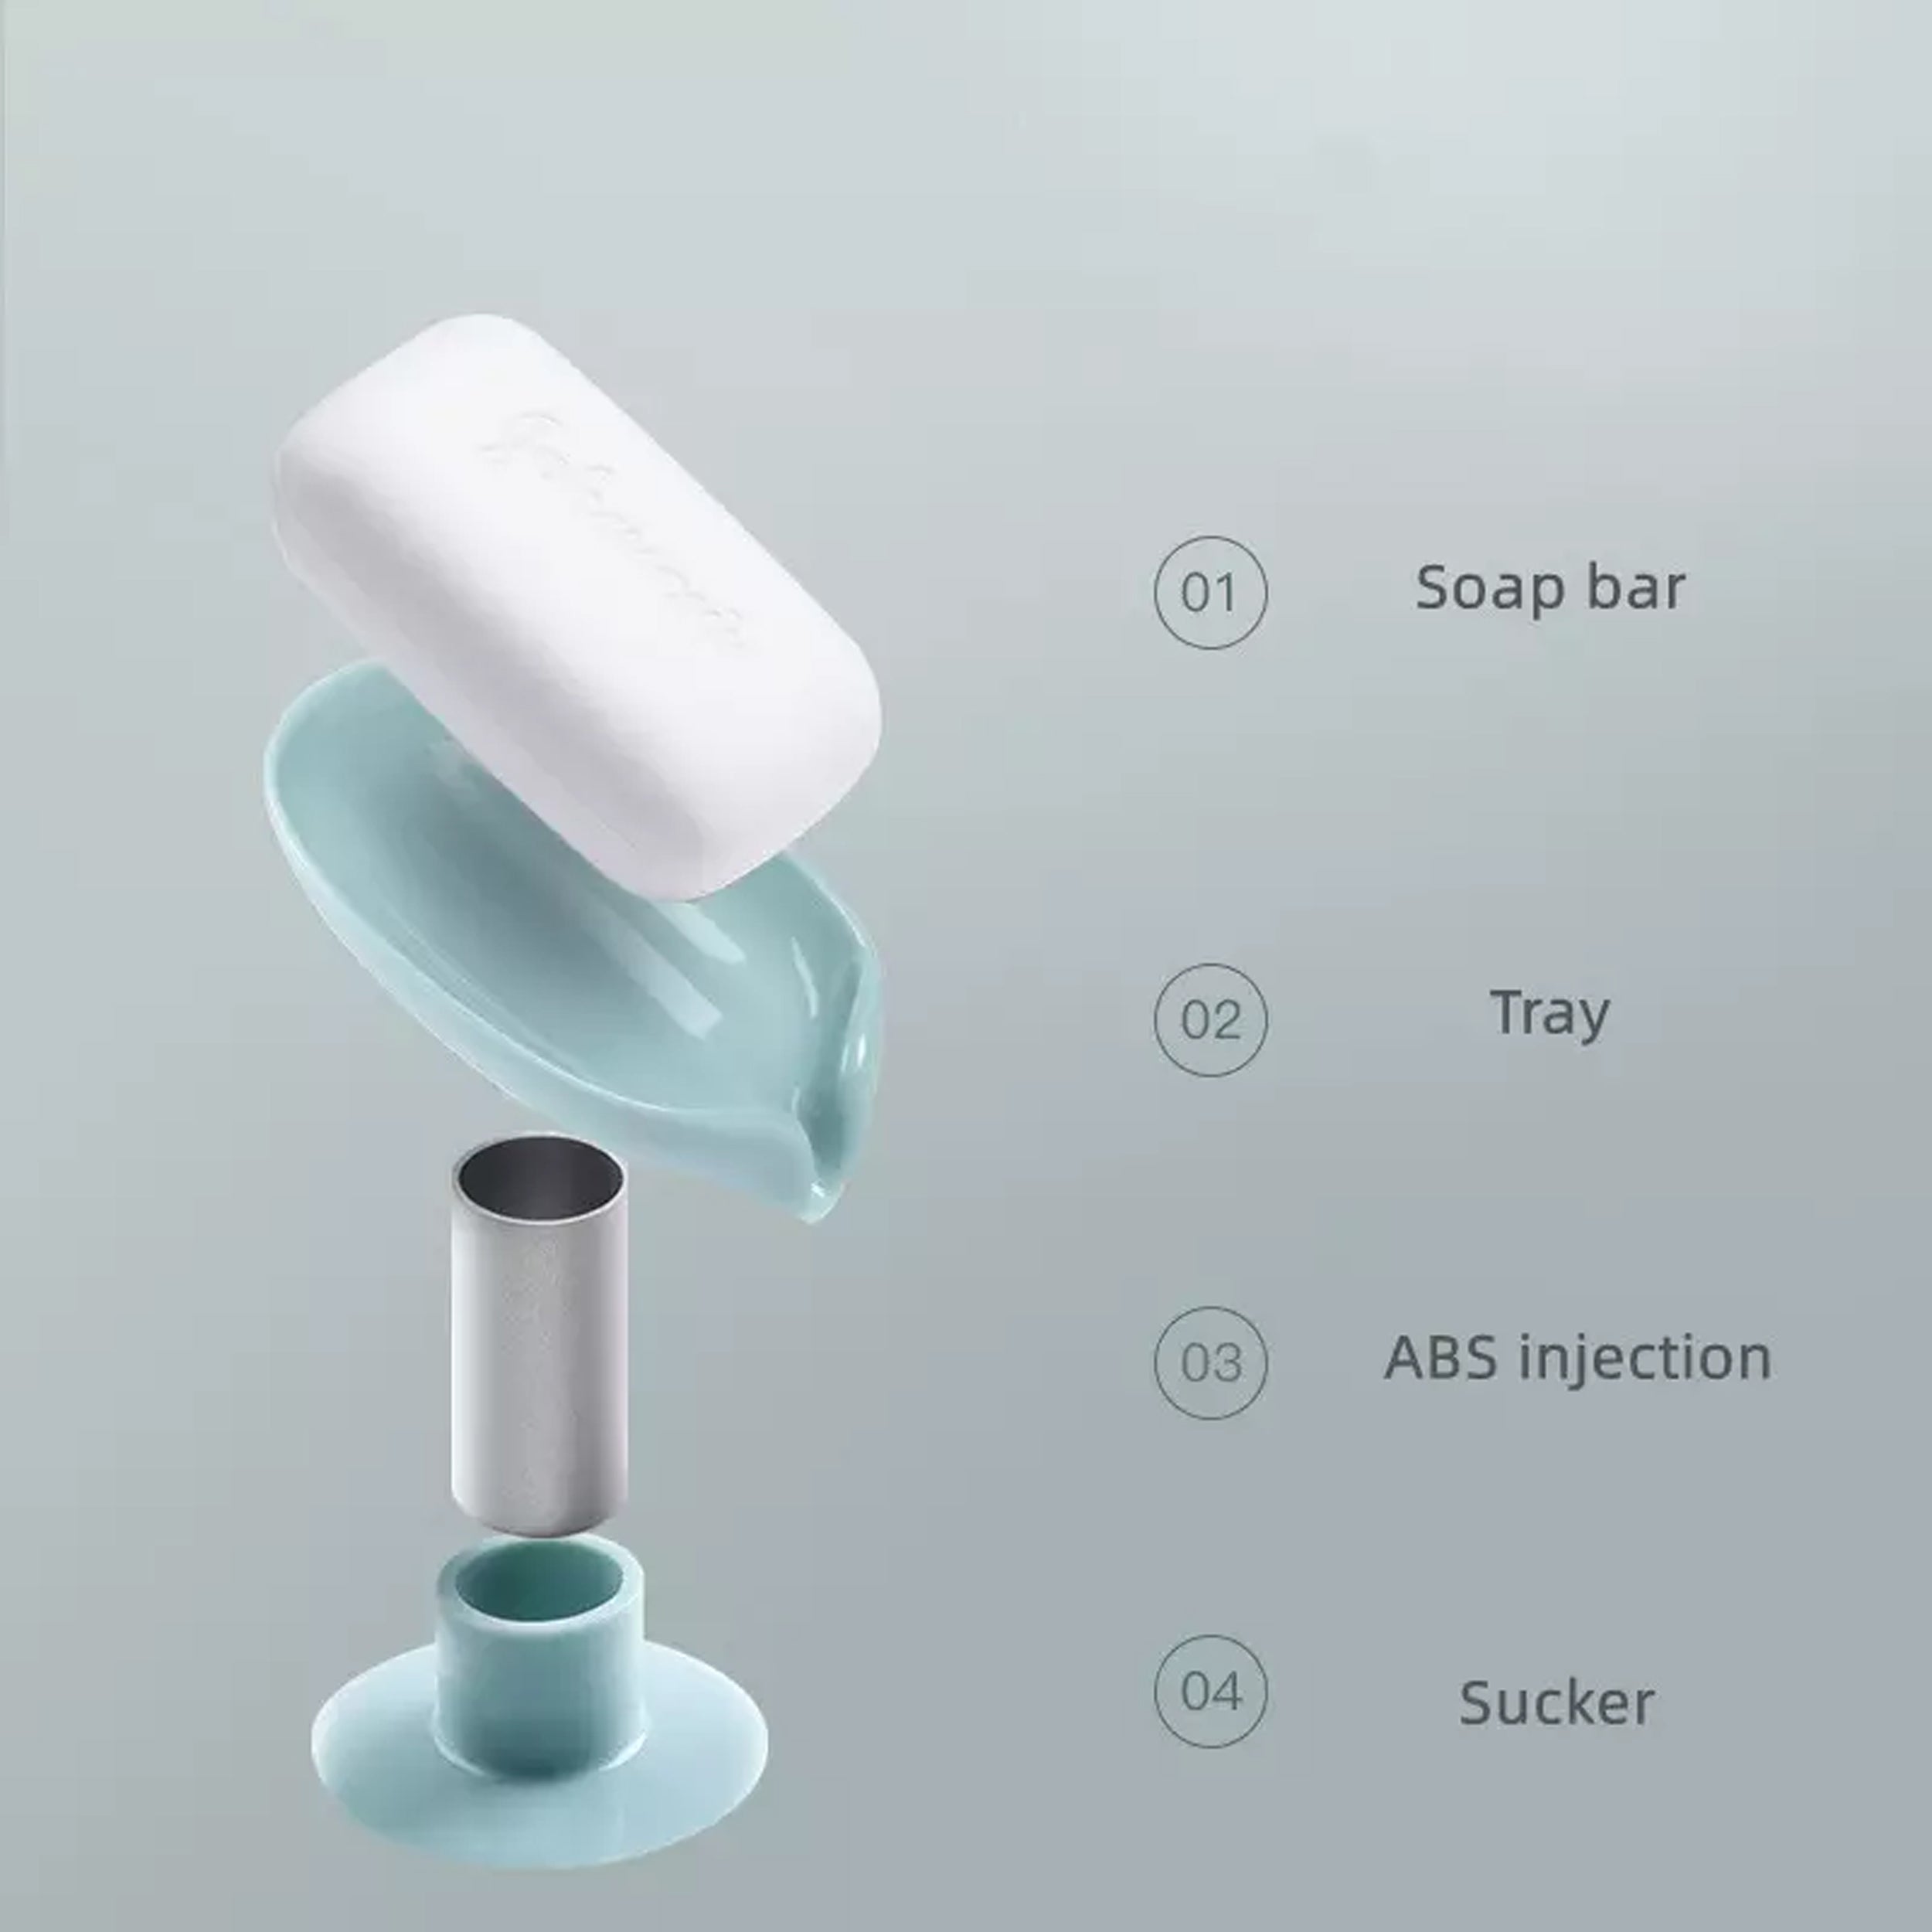 Self Draining Soap Holder with Suction Cup - Keep Your Soap Clean and Dry